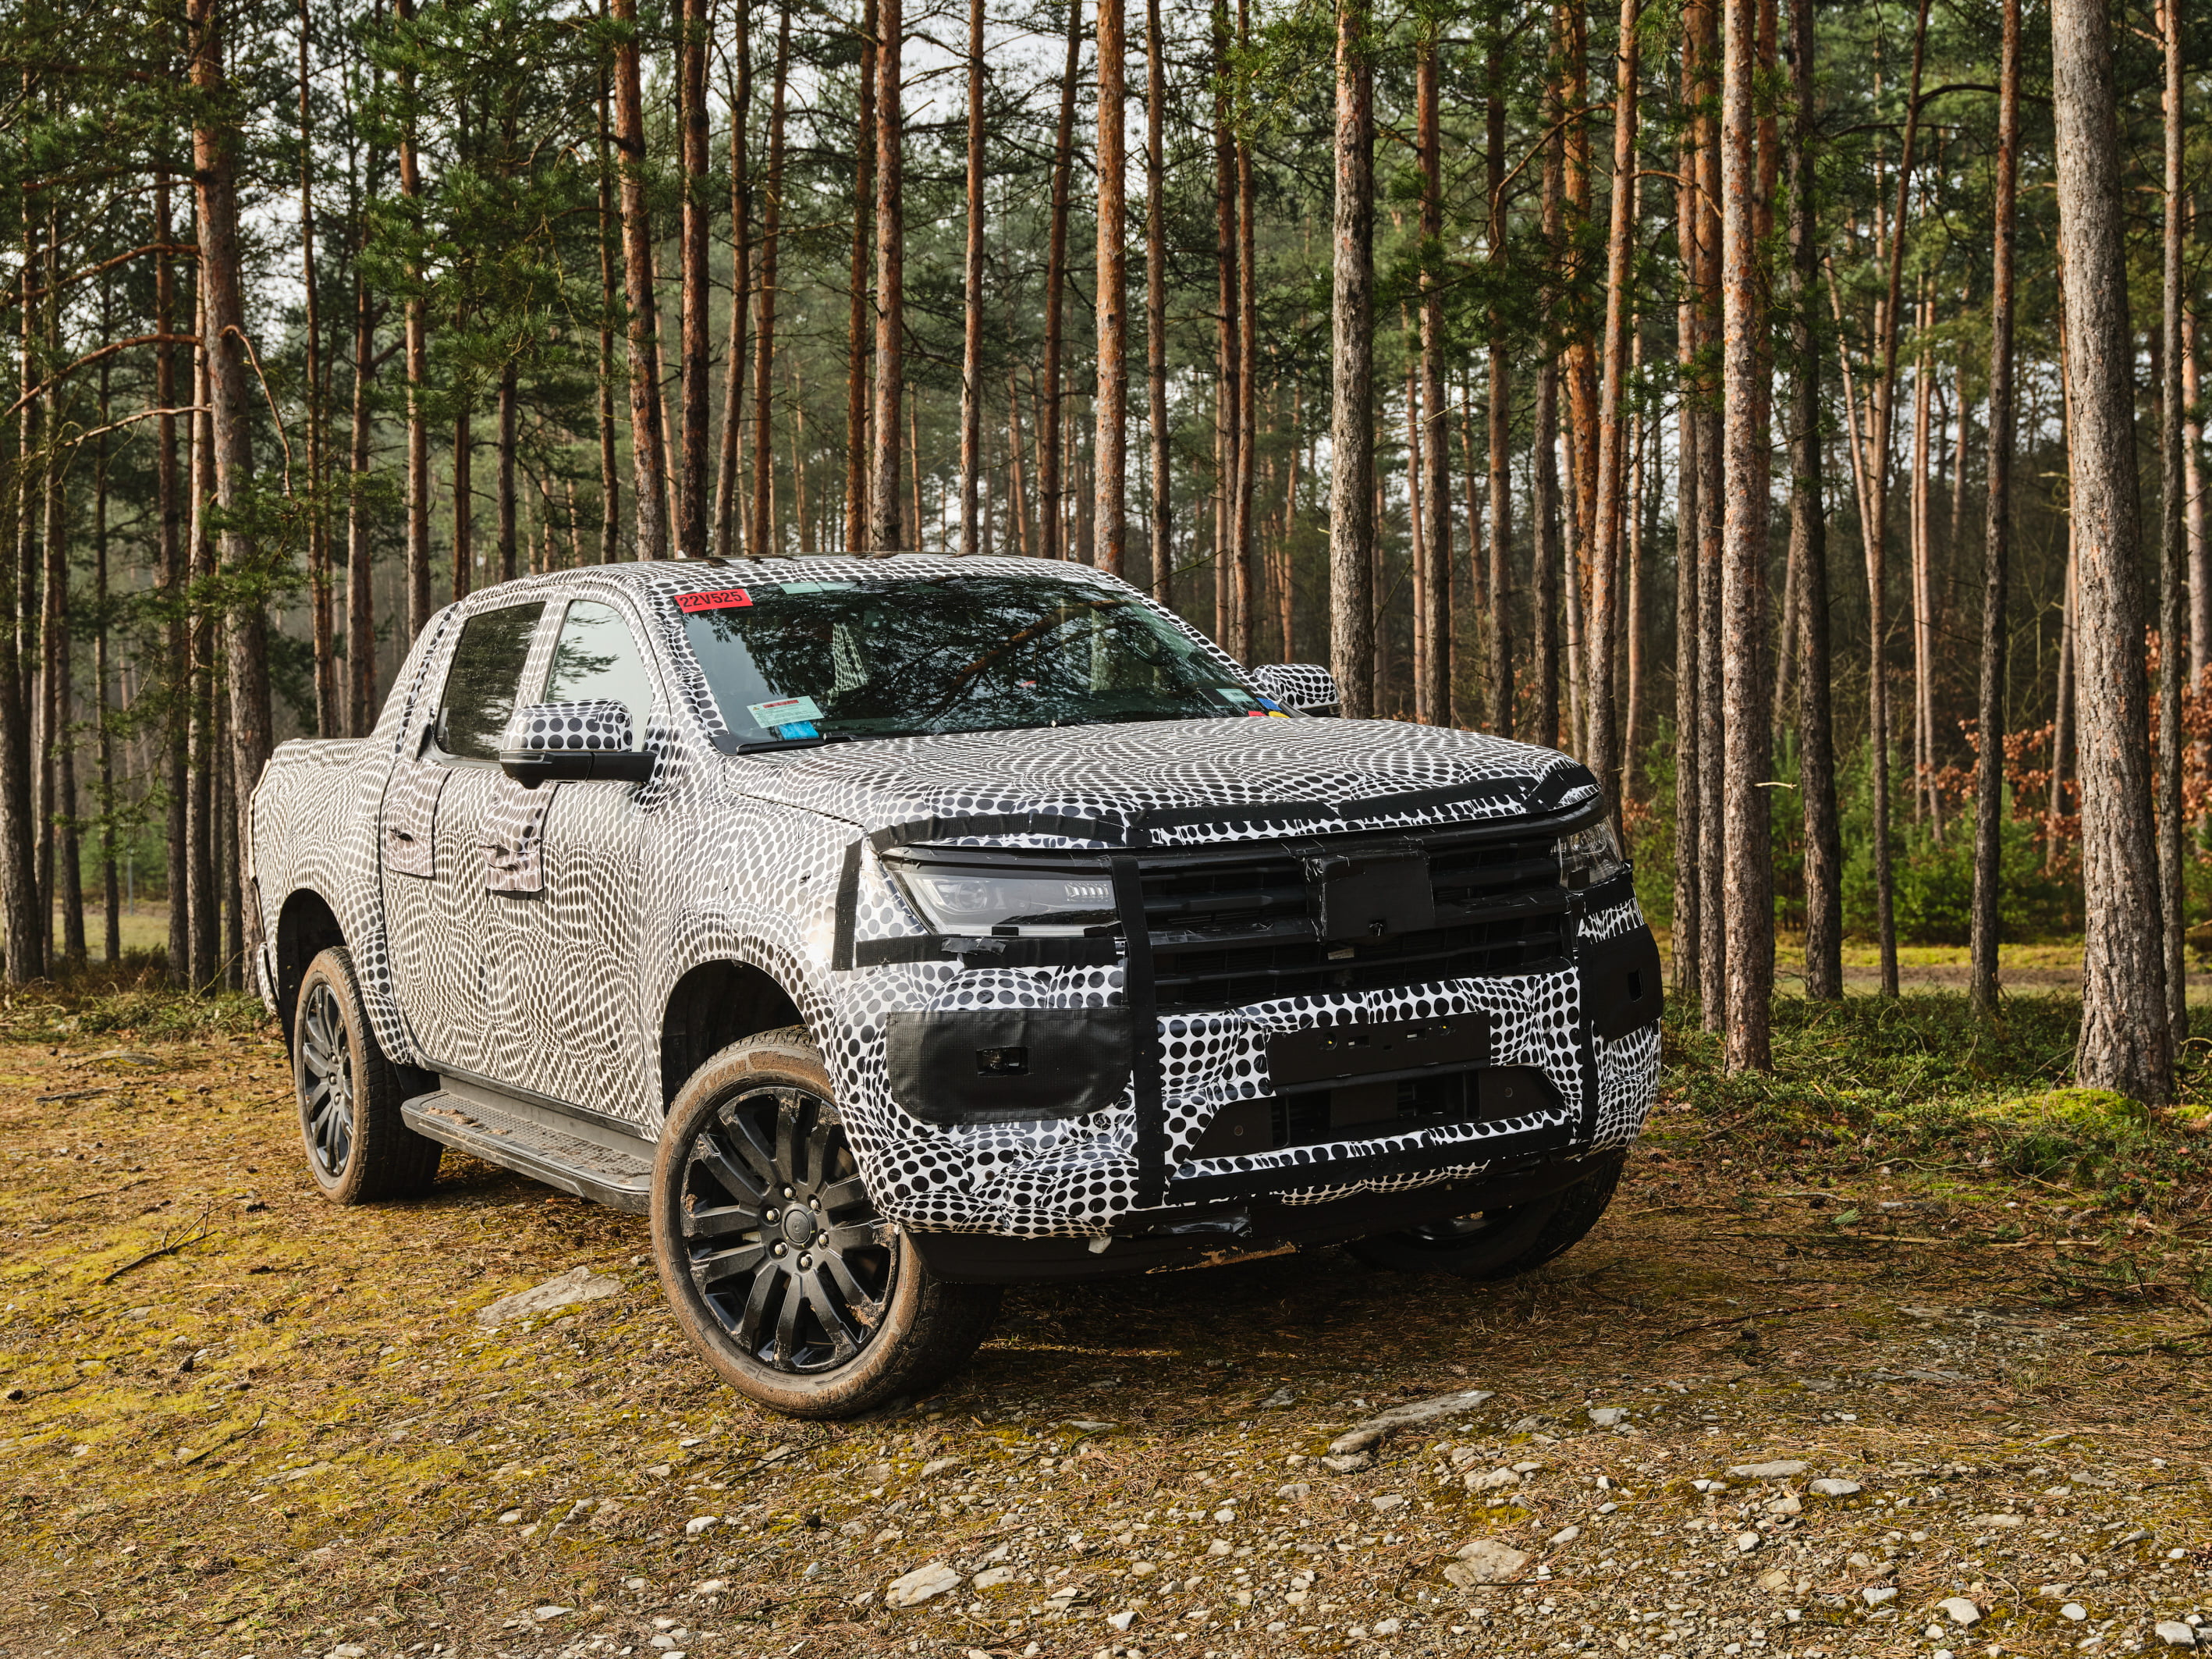 The Walkinshaw design team focused on making the Amarok V6 W-Series wider and more aggressive, with a completely redesigned front bumper, air intake grille, wheel arch flares, and a unique forged aluminium 20-inch 'Clayton' alloy wheel fitted with Pirelli scorpion ATR tyres.